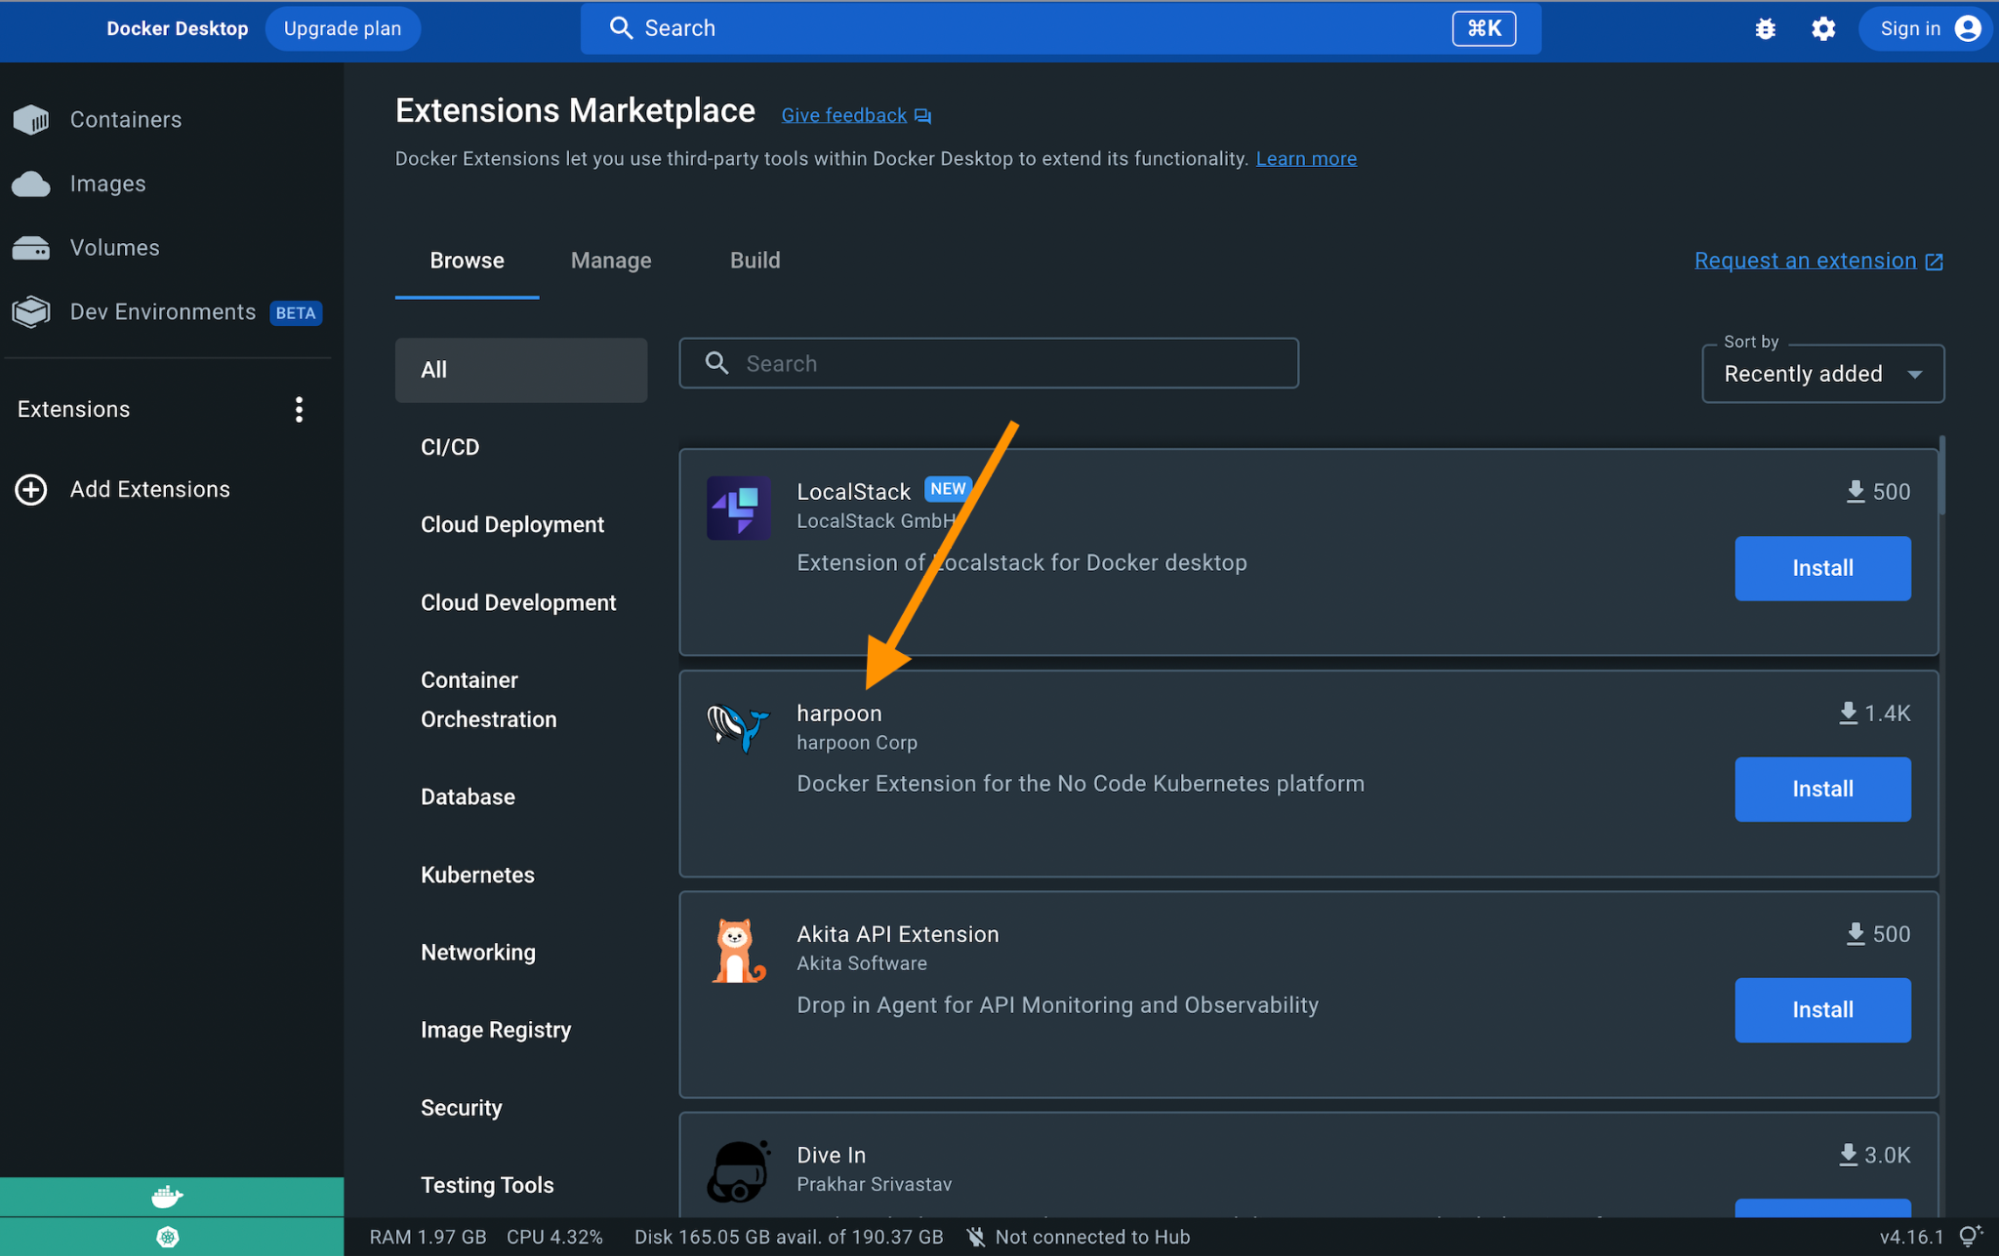 The harpoon docker extension on the extension marketplace.